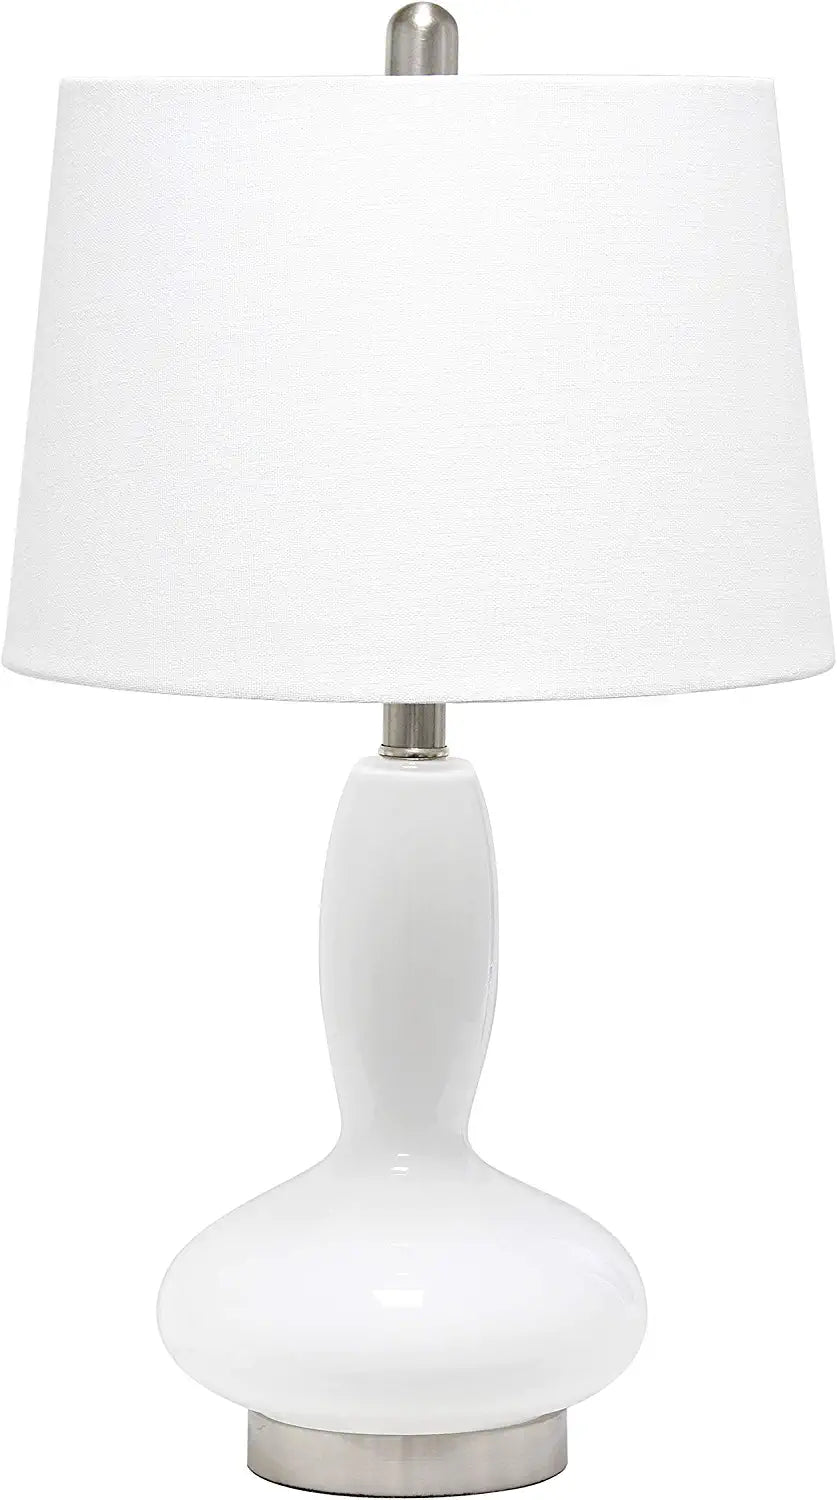 Elegant Designs LT3315-WHT Contemporary Curved Glass Table Lamp, White